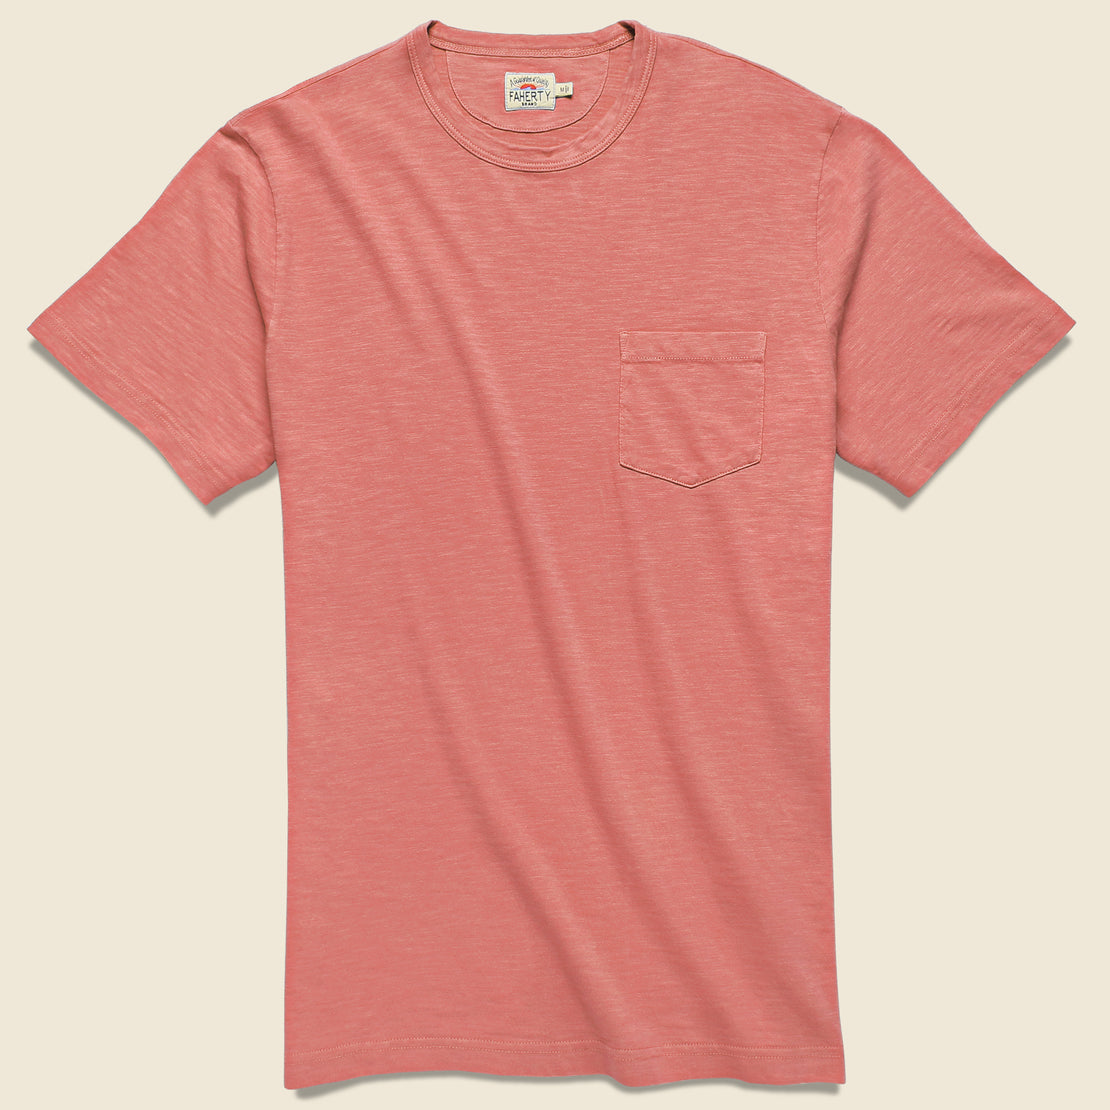 Faherty Garment Dyed Pocket Tee - New Red